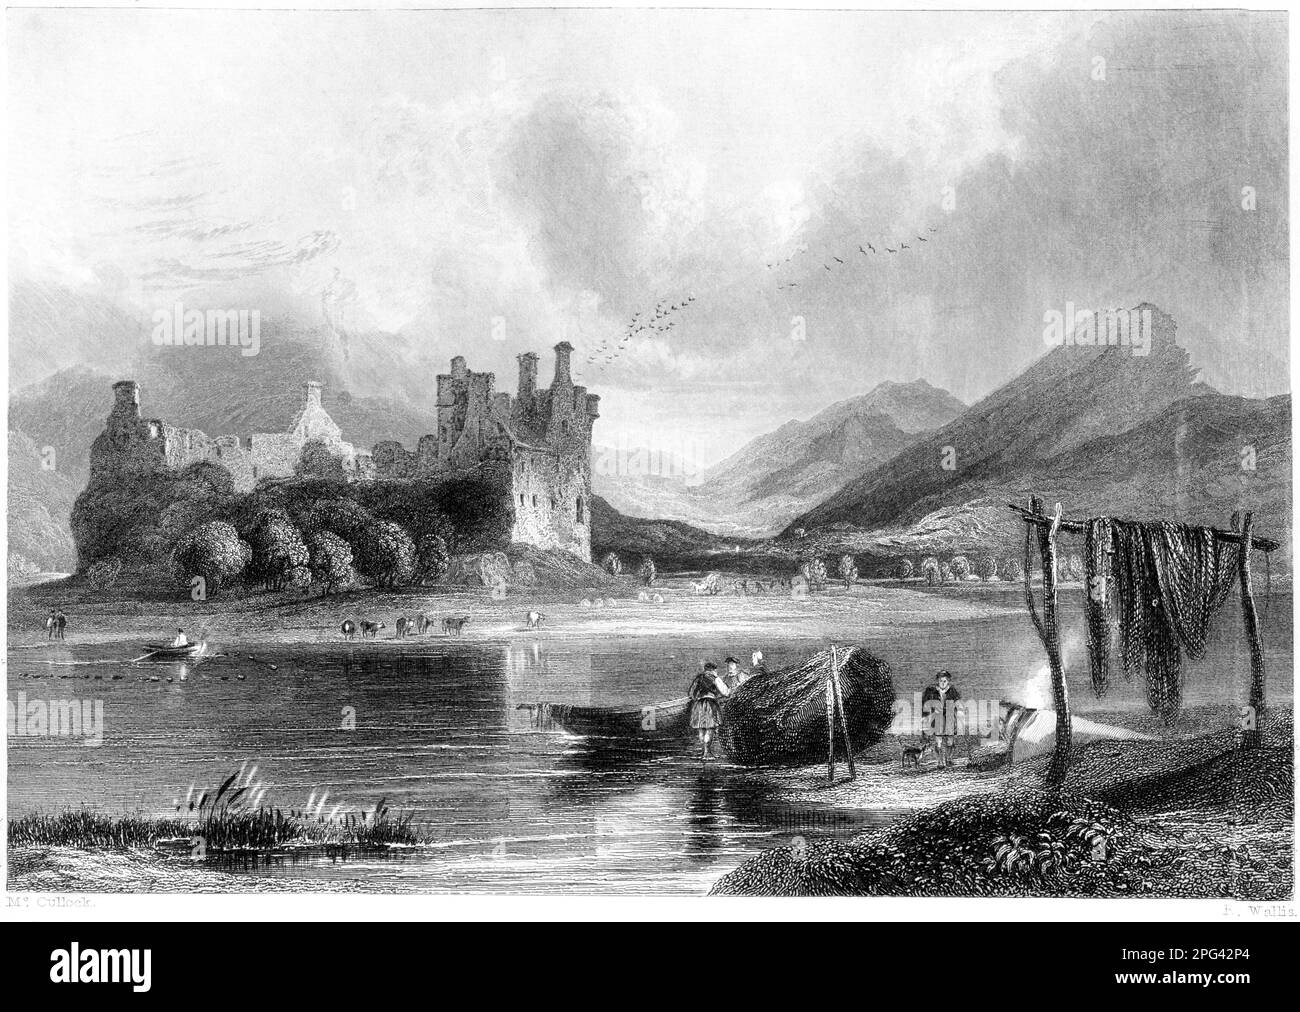 An engraving of Kilchurn Castle, Loch Awe, Argyleshire, Scotland UK scanned at high resolution from a book printed in 1840. Stock Photo